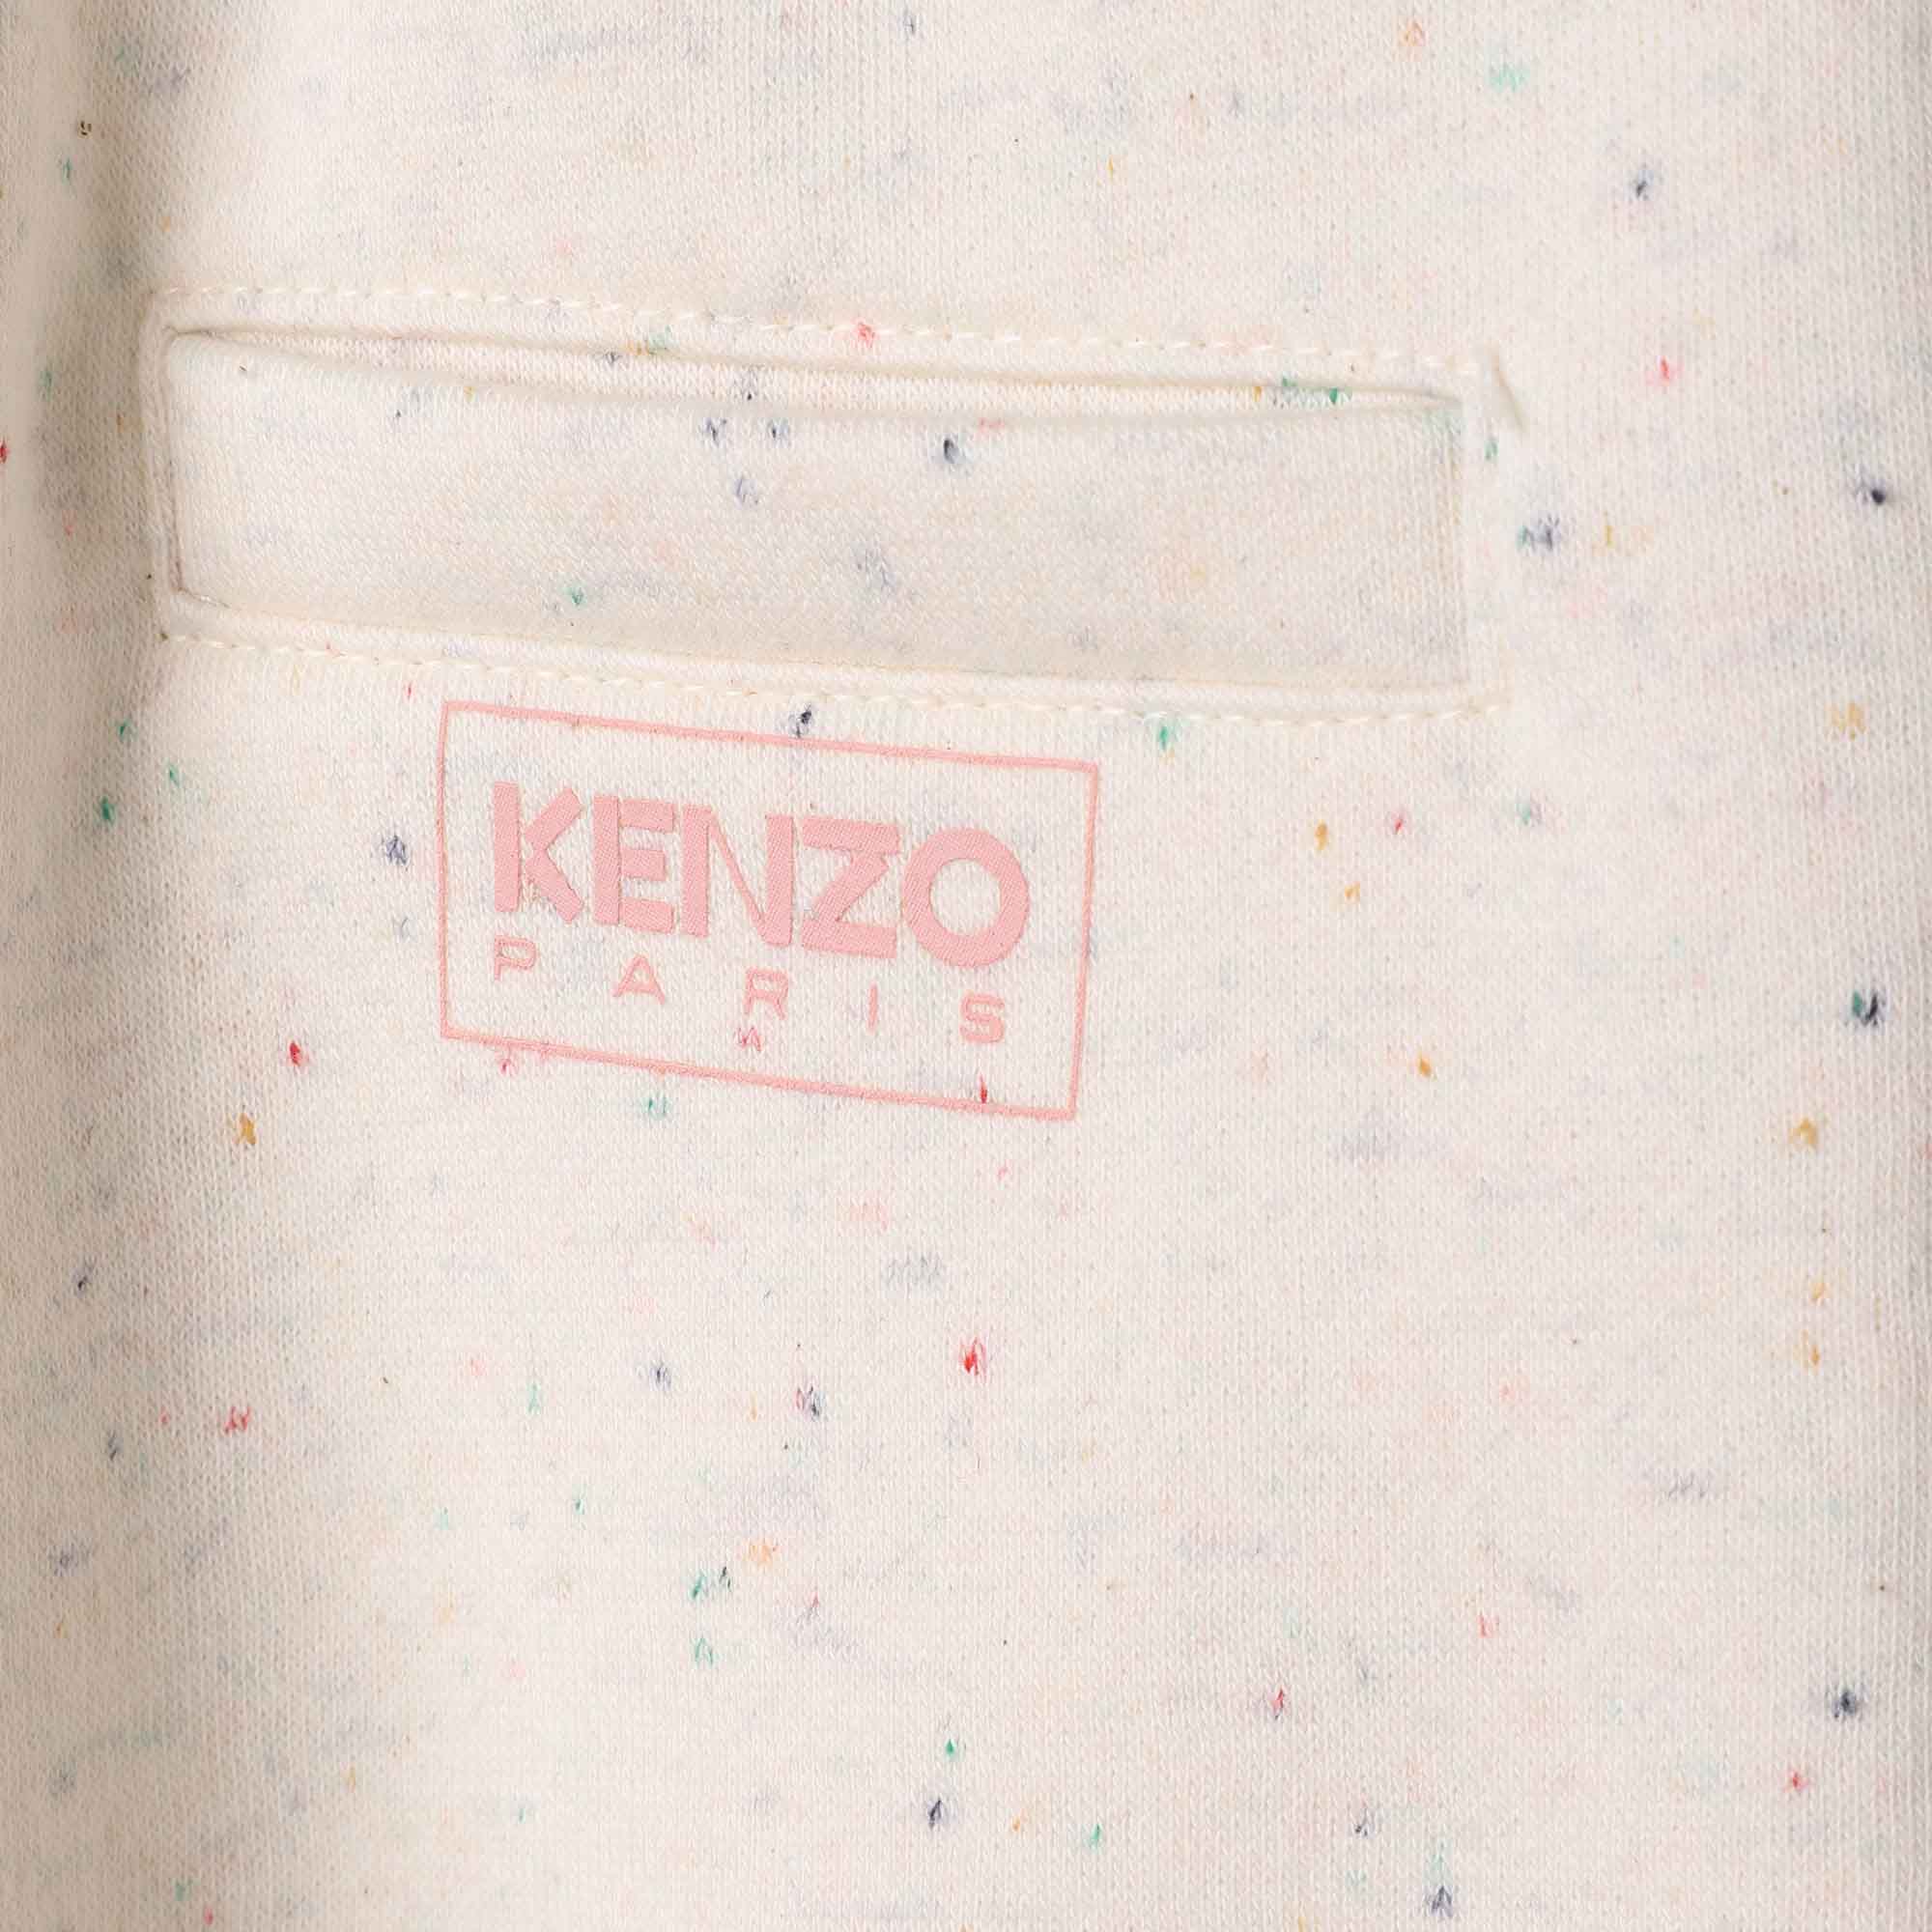 Printed jogging trousers KENZO KIDS for GIRL